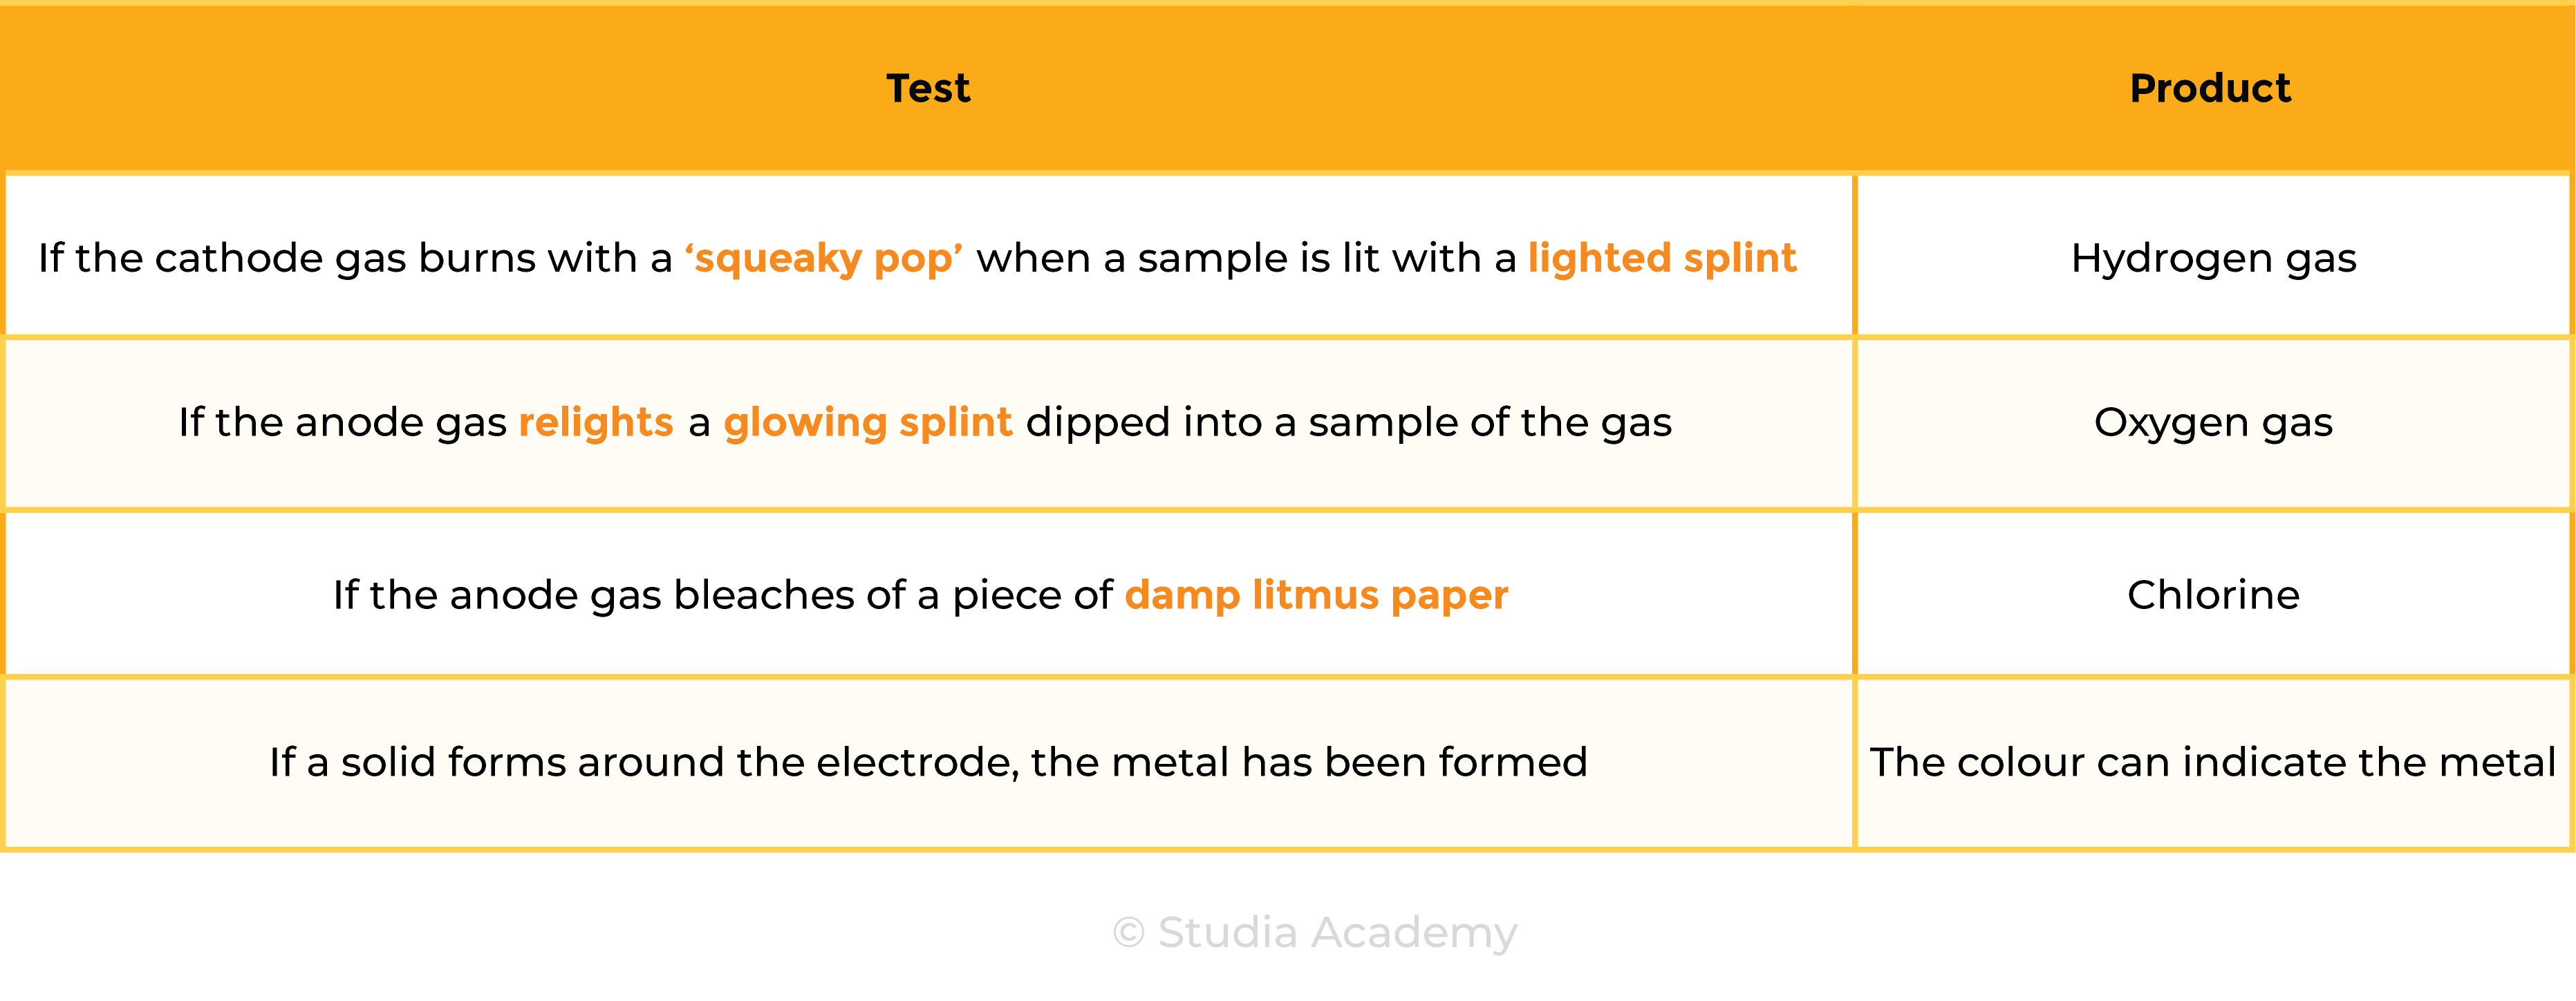 edexcel_igcse_chemistry_topic 09 tables_electrolysis_006_tests for products